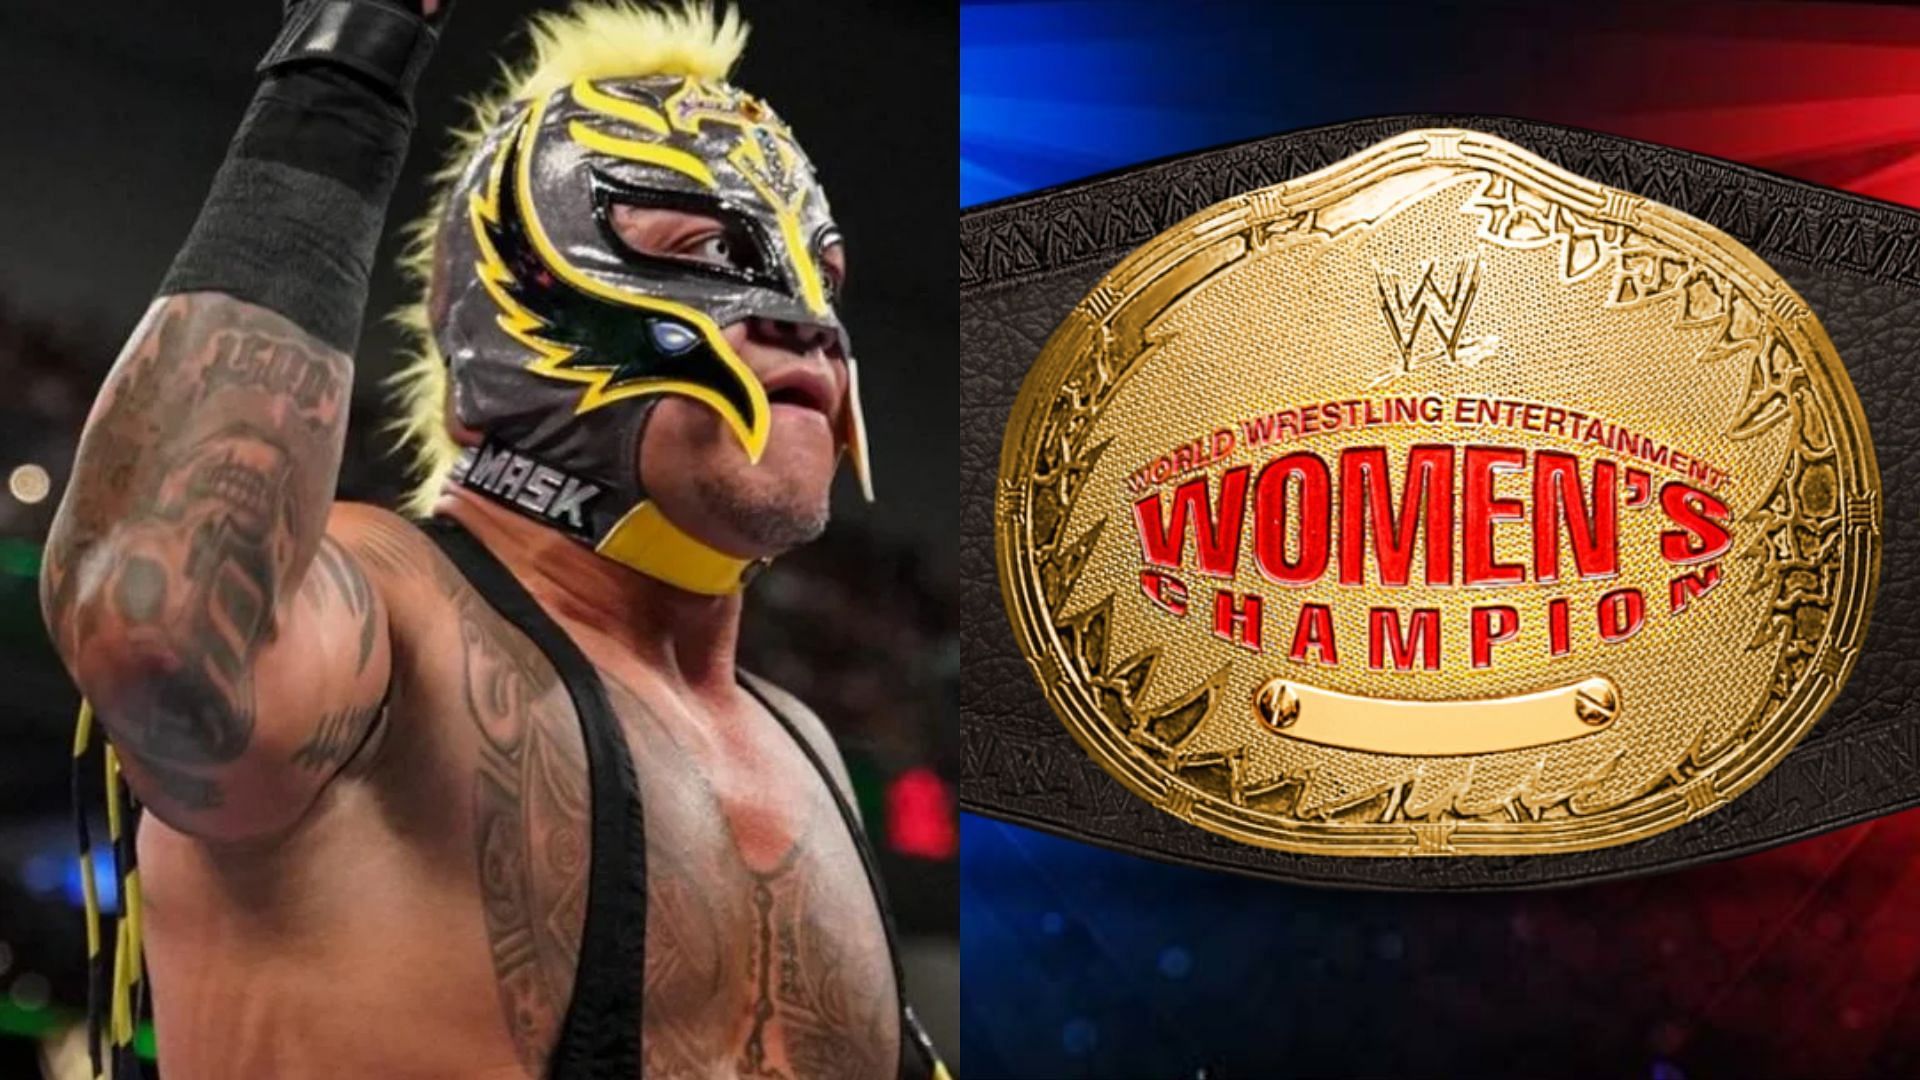 Rey Mysterio is the first announced name for the WWE Hall of Fame Class of 2023